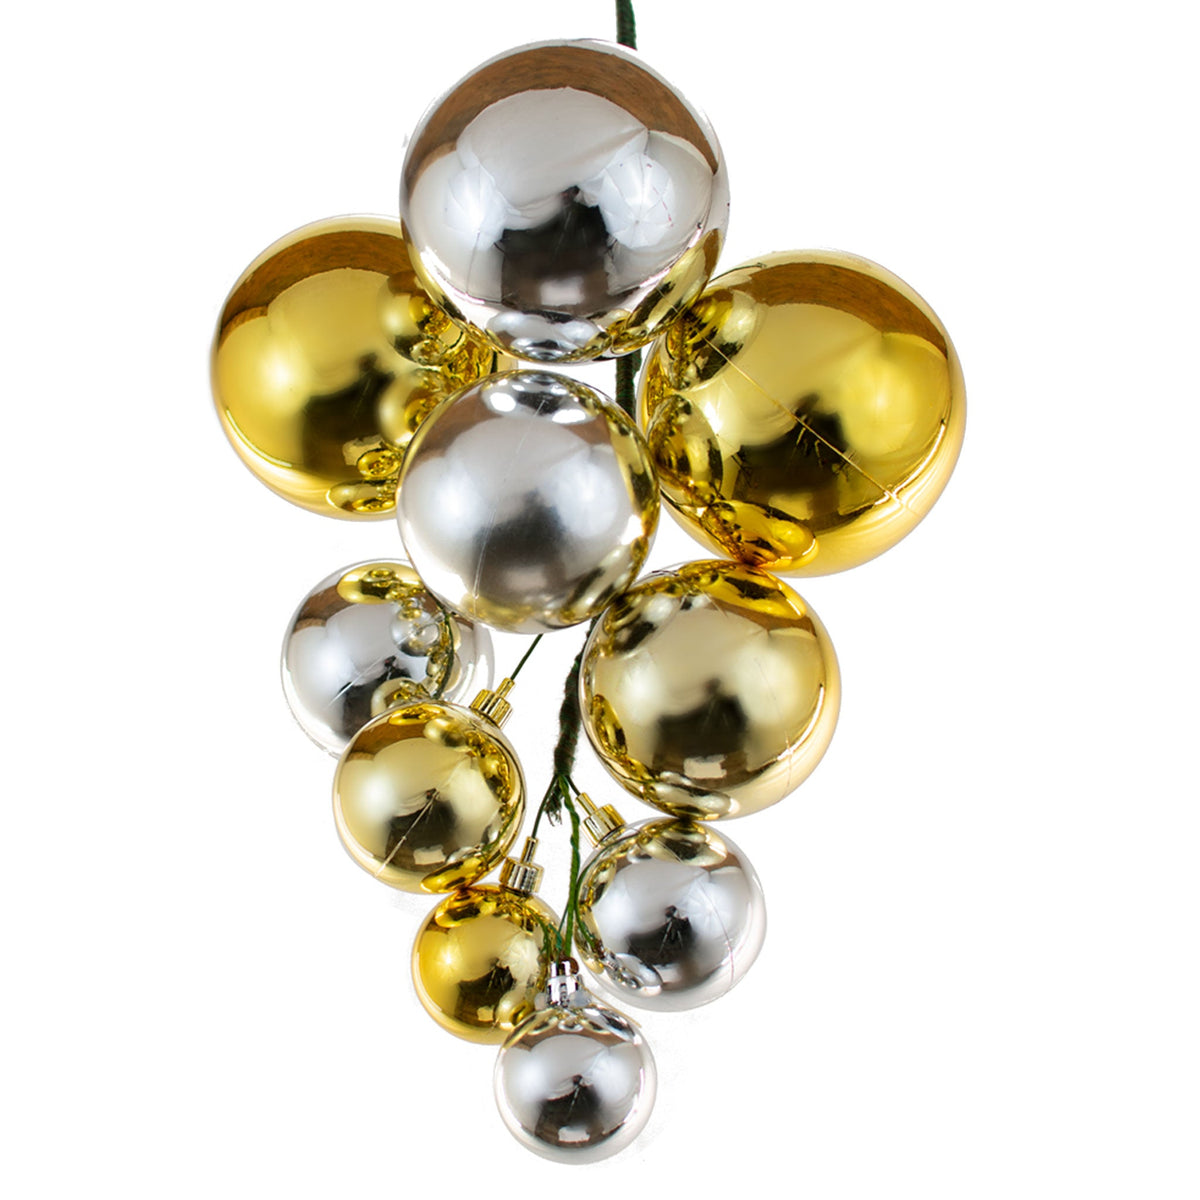 Shiny Gold & Silver Ball Cluster